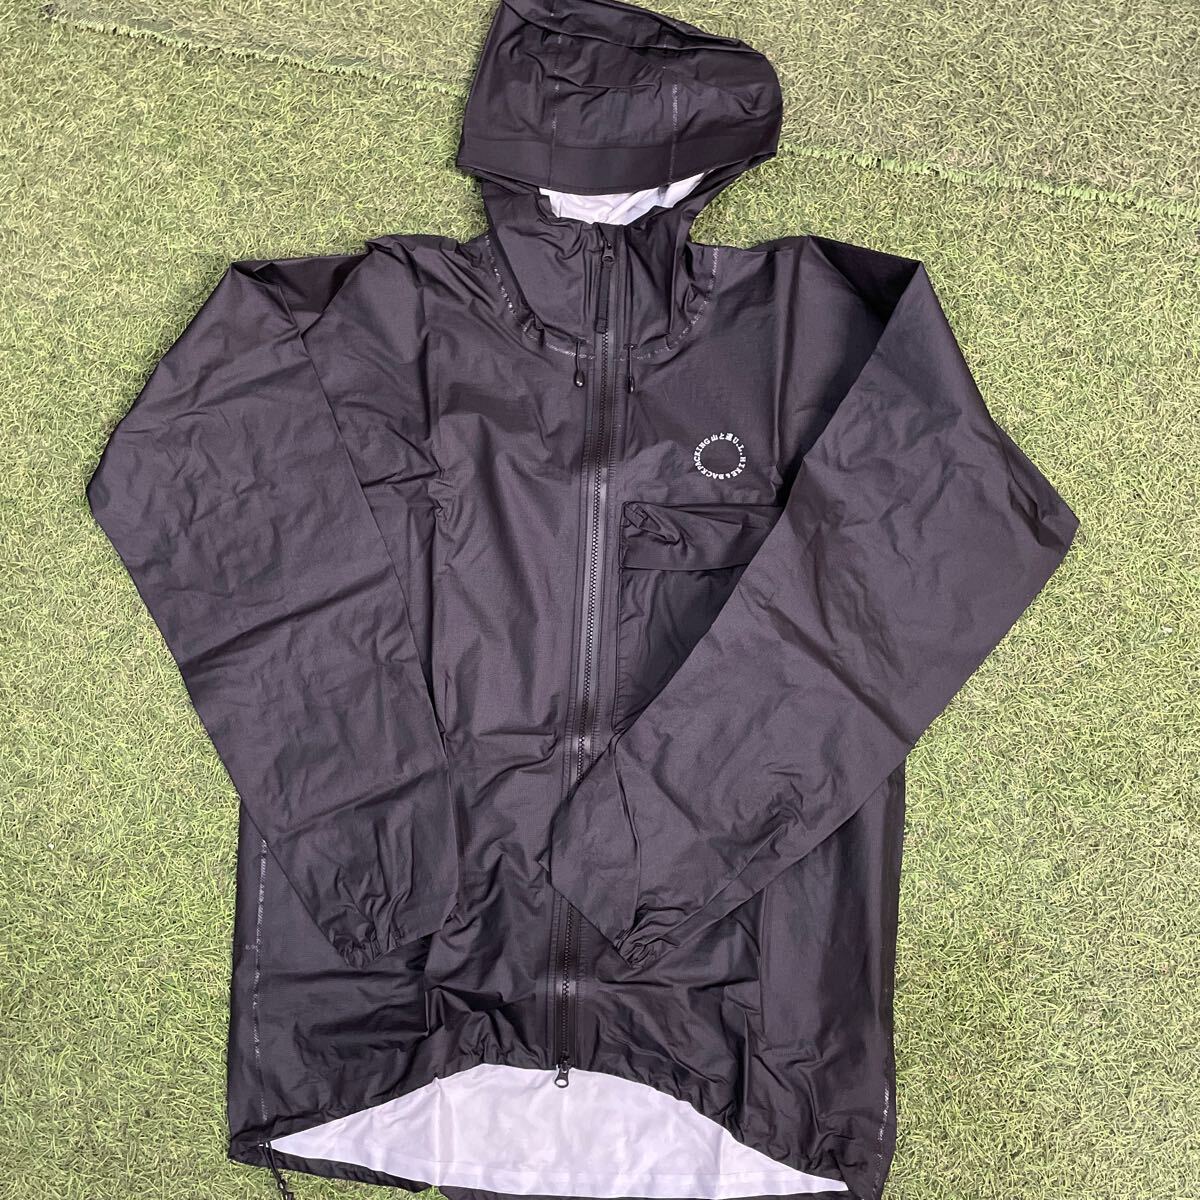 NA132-A61 yamatomichi mountain . road UL All-weather Jacket Black UNISEX S size outdoor high King unused exhibition goods wear 